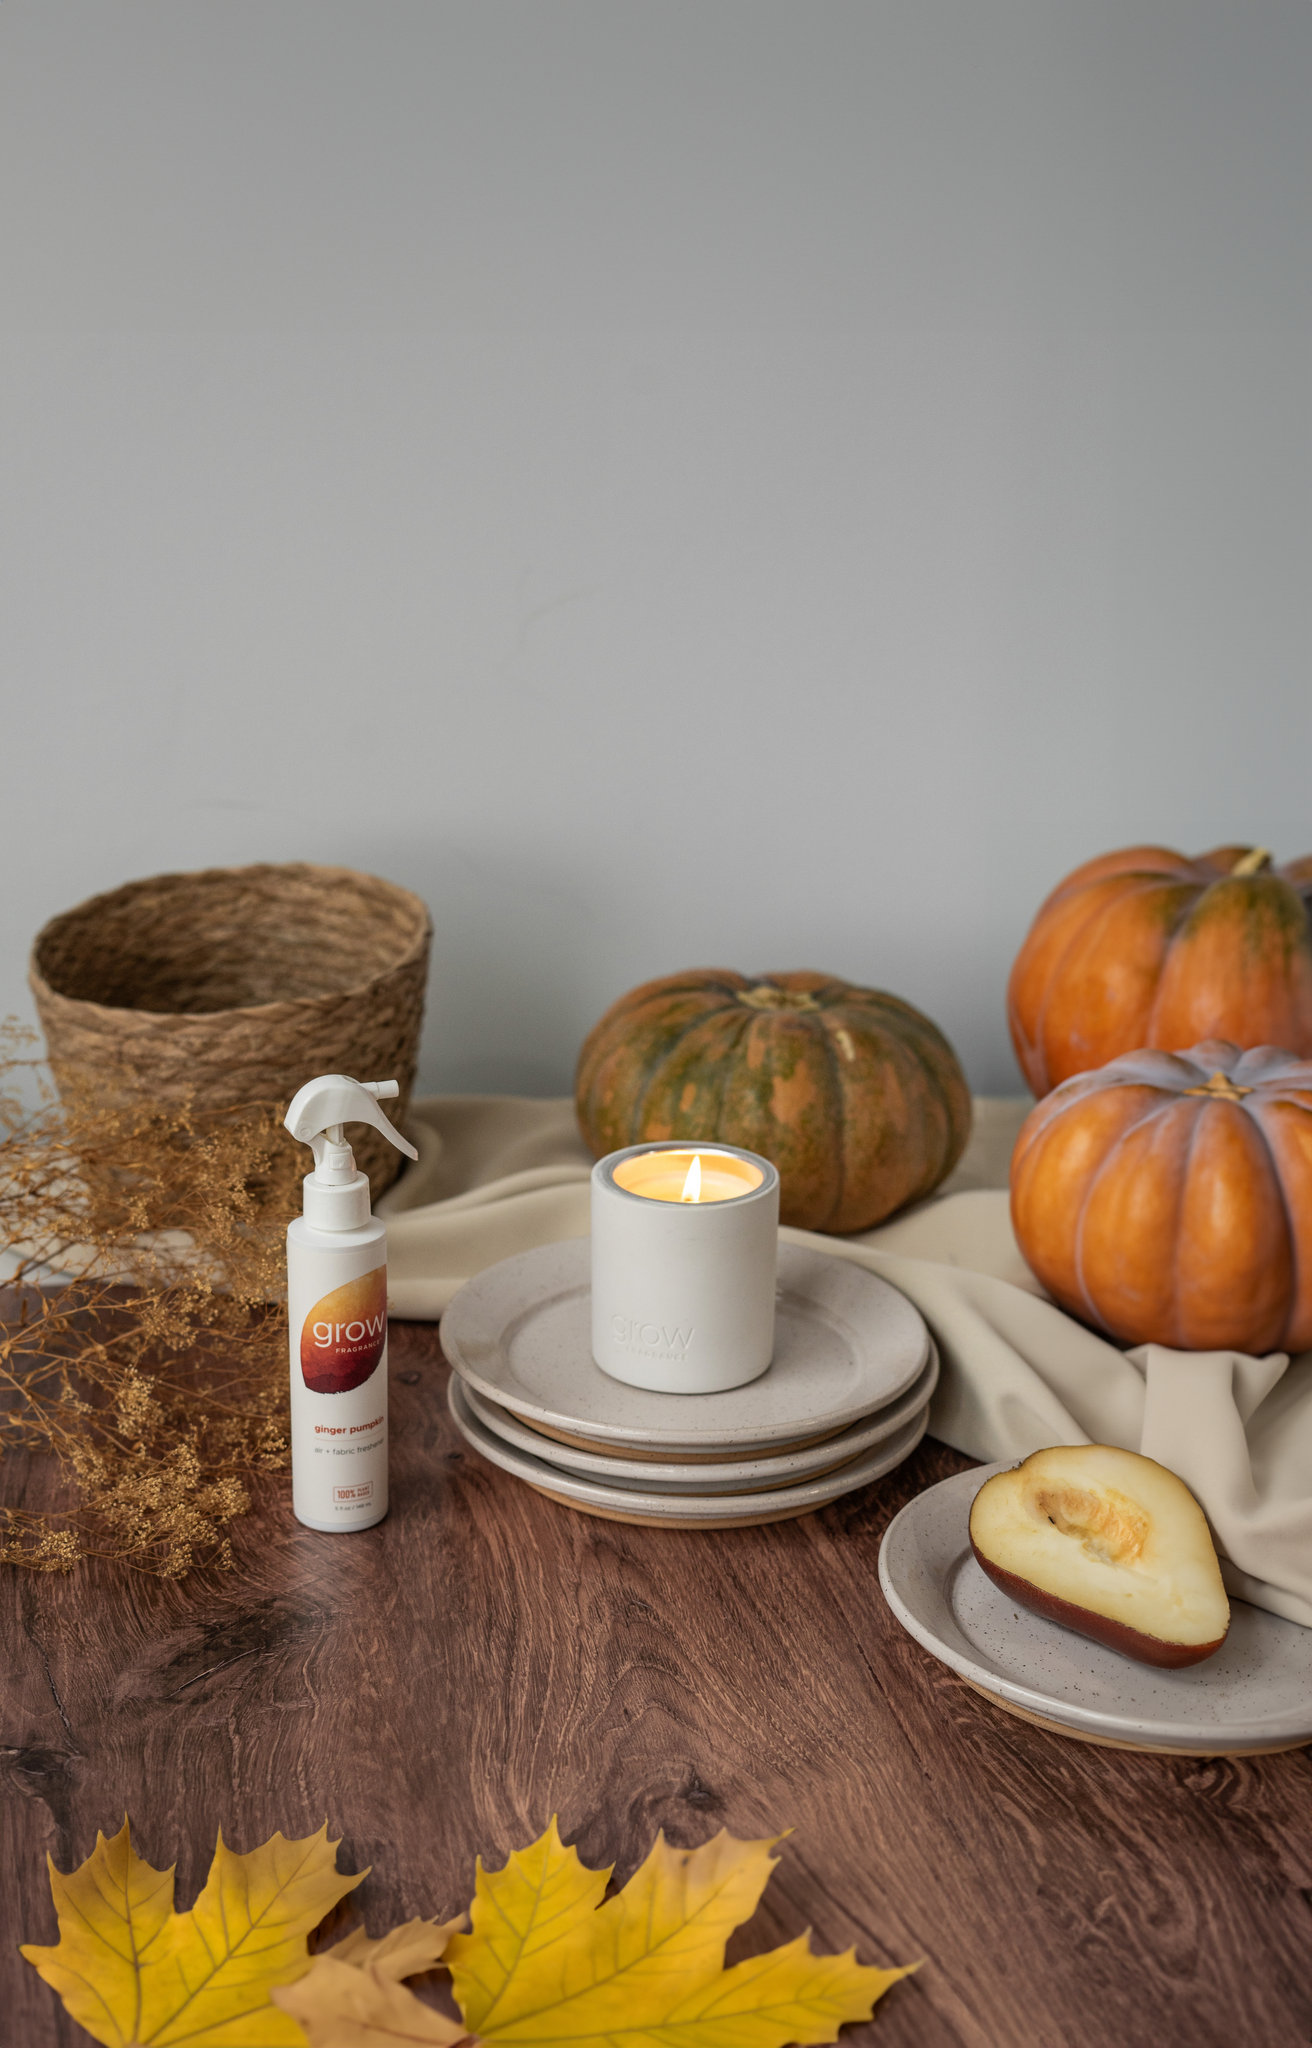 Fall scent pairings Non-toxic air fresheners Non-toxic fabric fresheners Non-toxic candles Cozy home fragrances Autumn ambiance Scent pairing guide Fall home scents Woodland Sage and Ginger Pumpkin scents Fall fragrance combinations